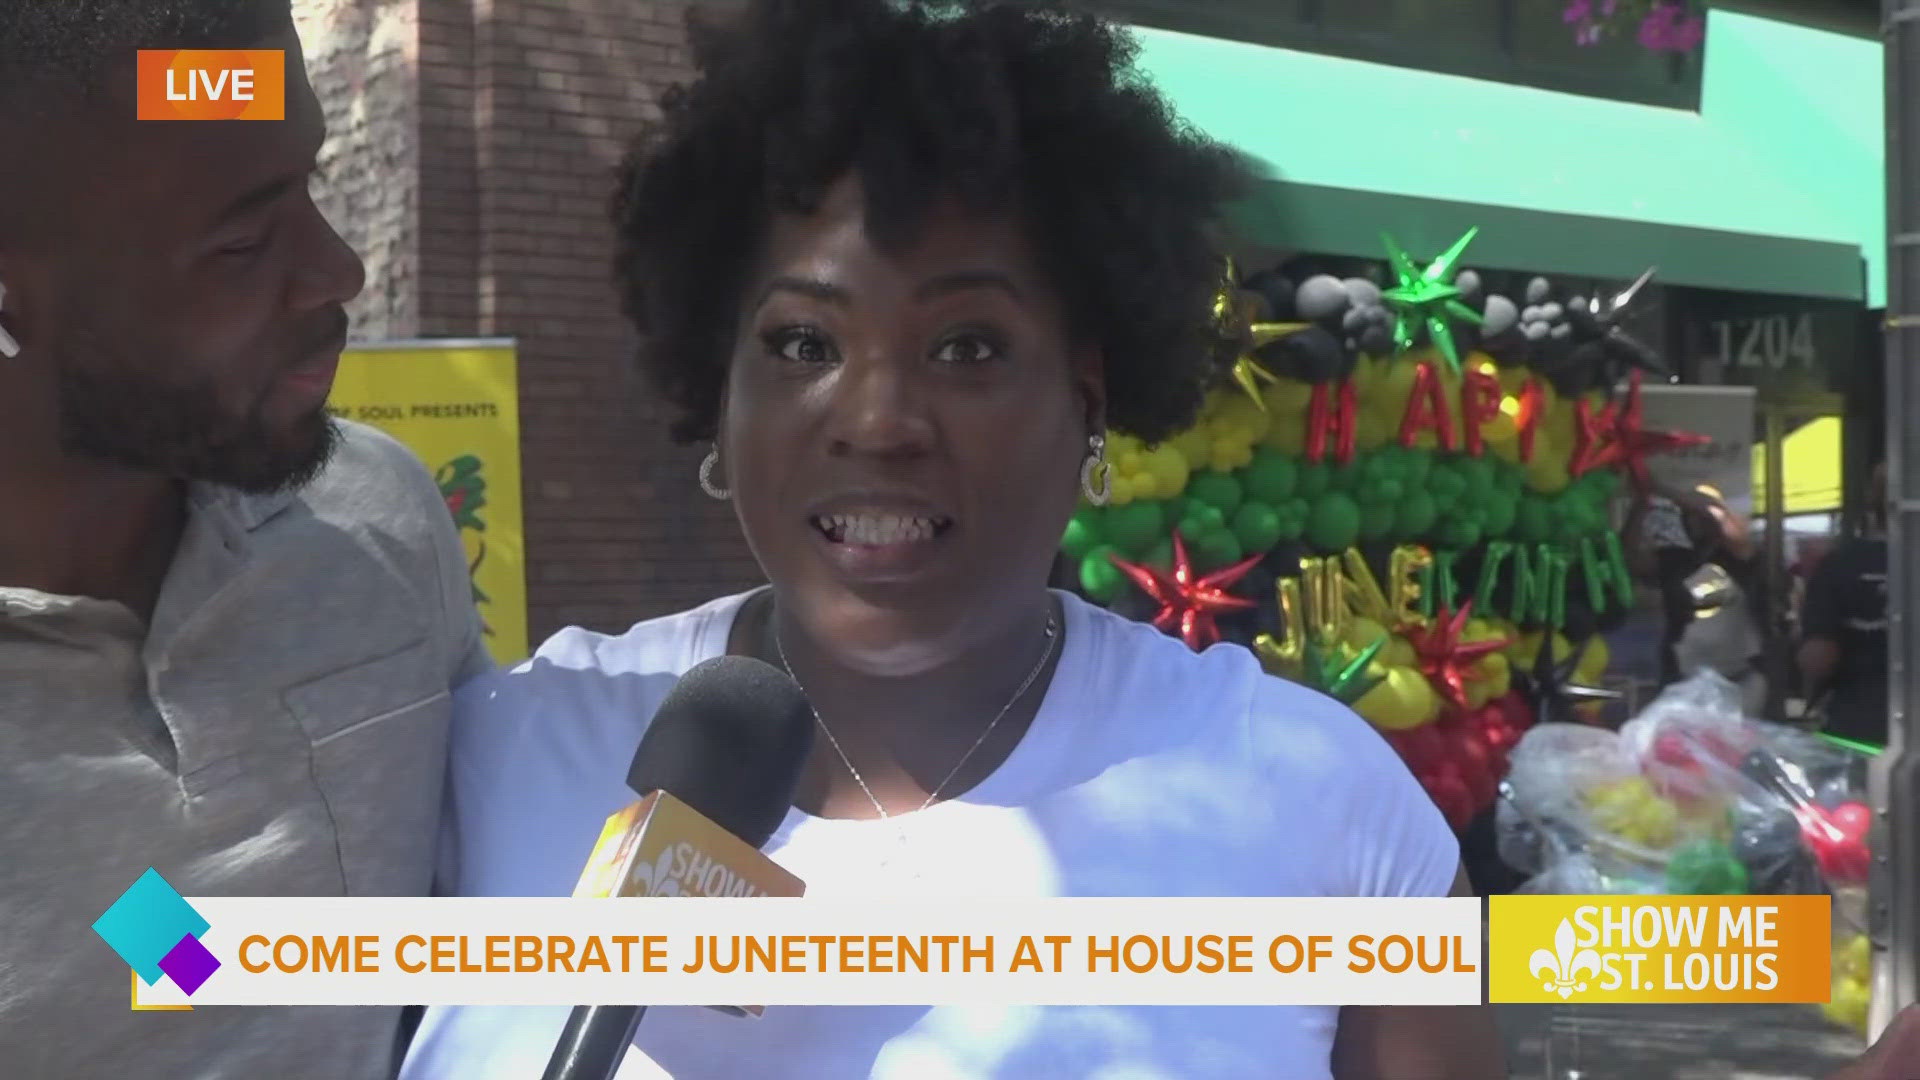 Celebrate Juneteenth at House of Soul from noon to 8:30 p.m.